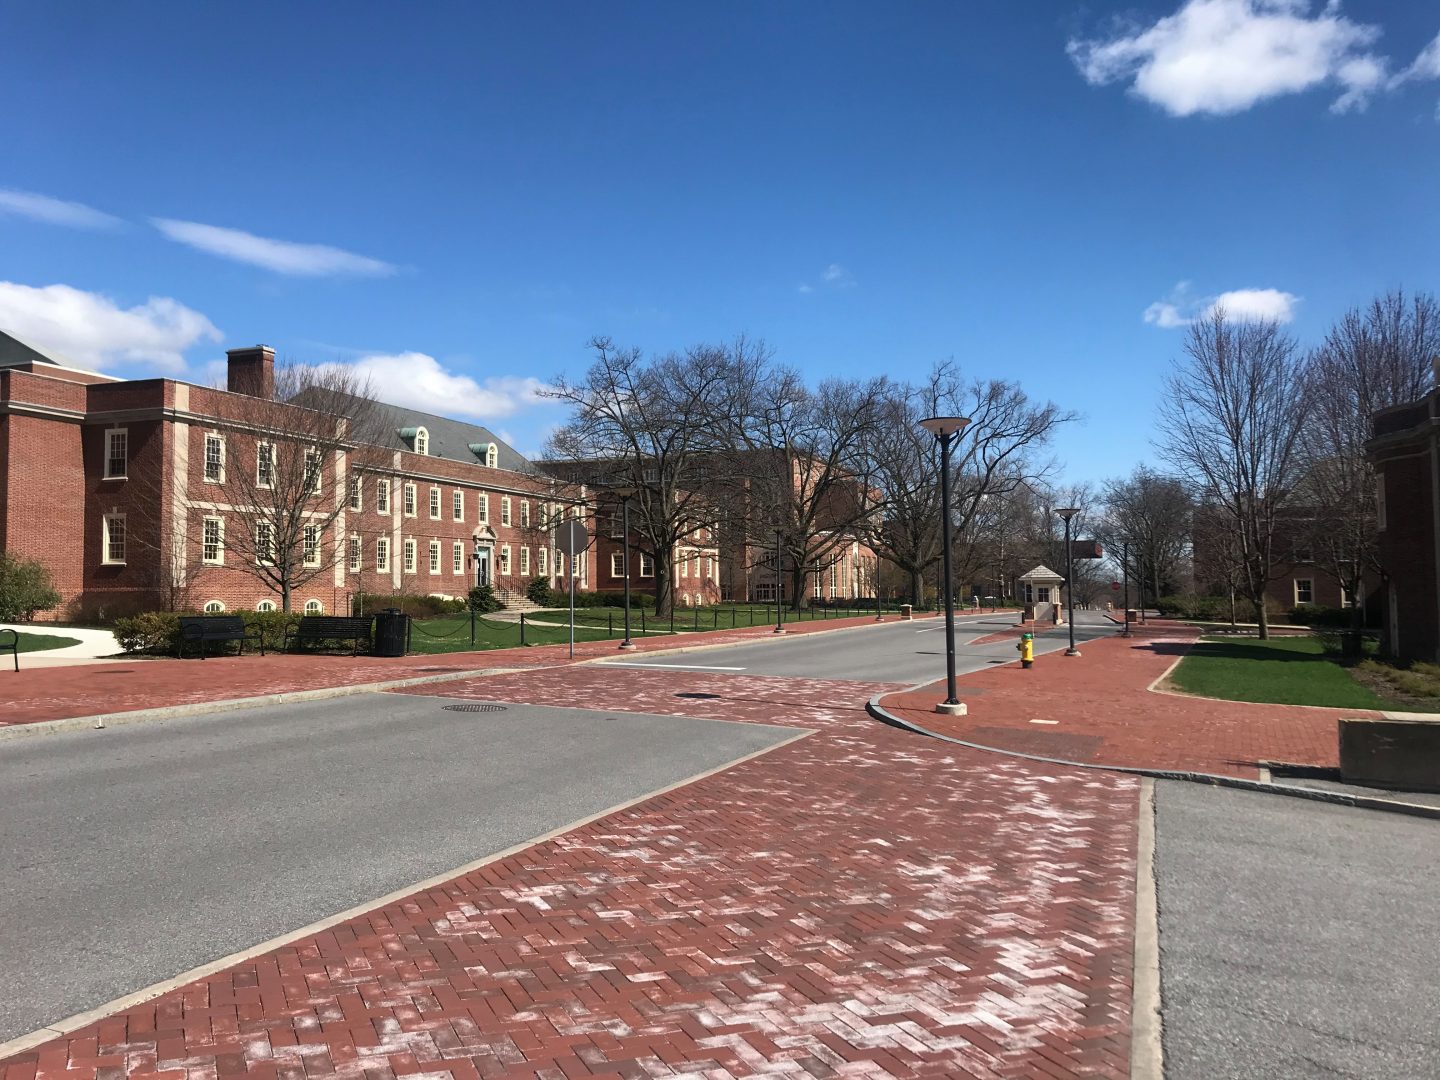 Penn State’s University Park campus deserted as college students transition to remote learning amid coronavirus. (Photo courtesy of Jinny Kim)